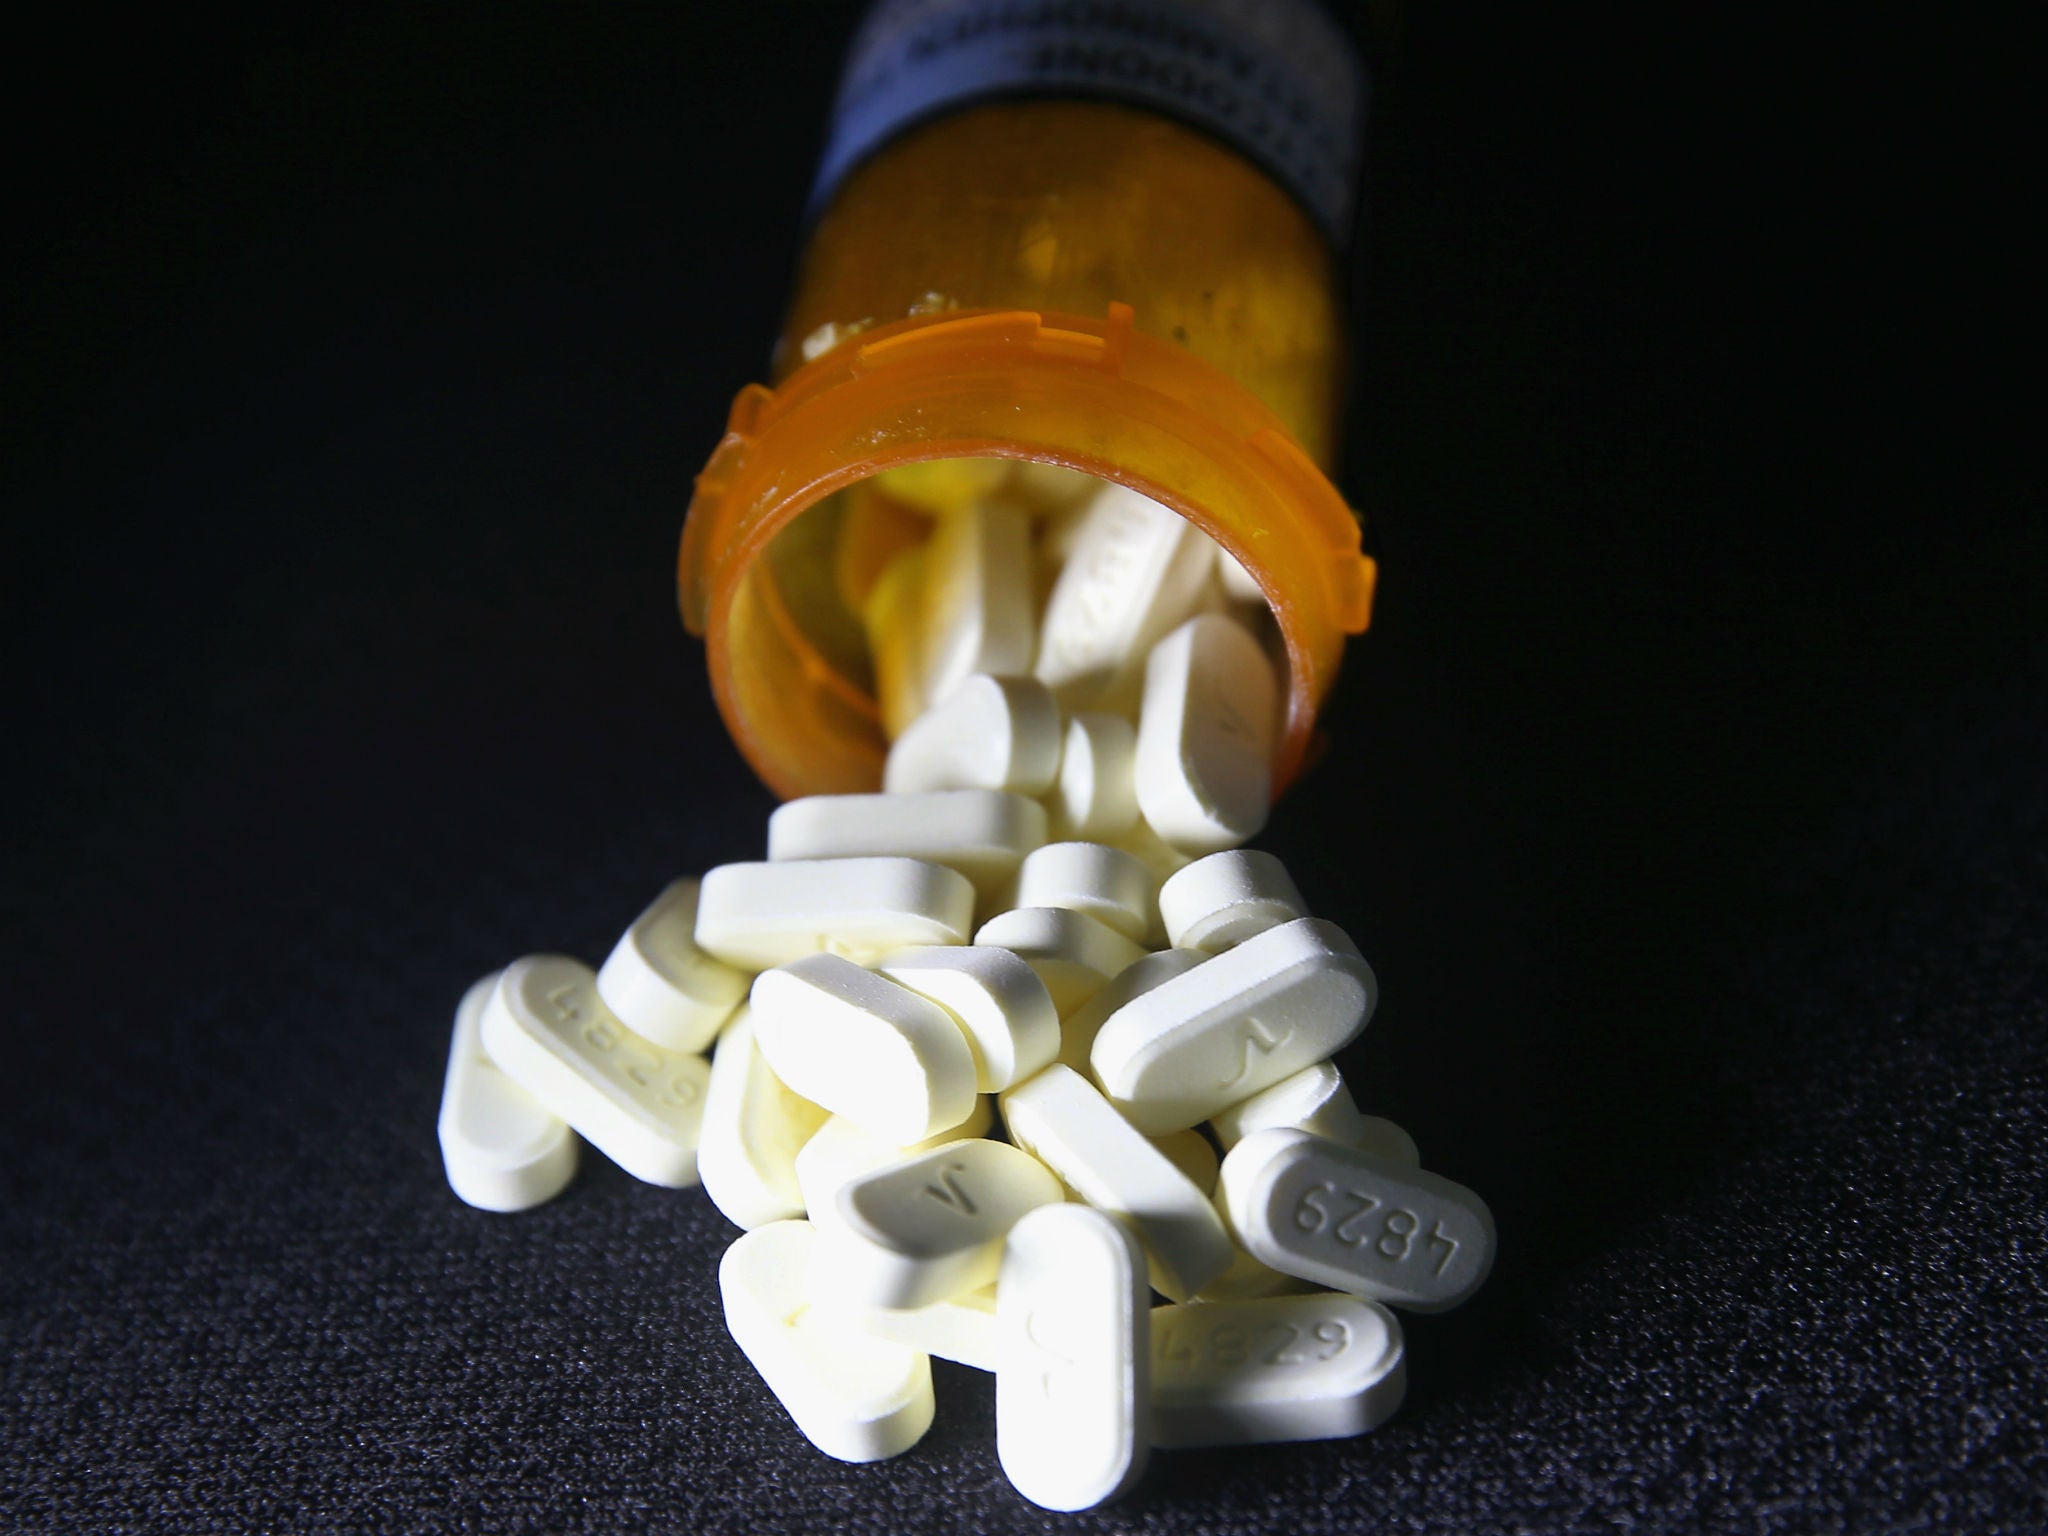 The lawsuit notes that public health officials consider the opioid epidemic to be the 'worst drug crisis in American history'